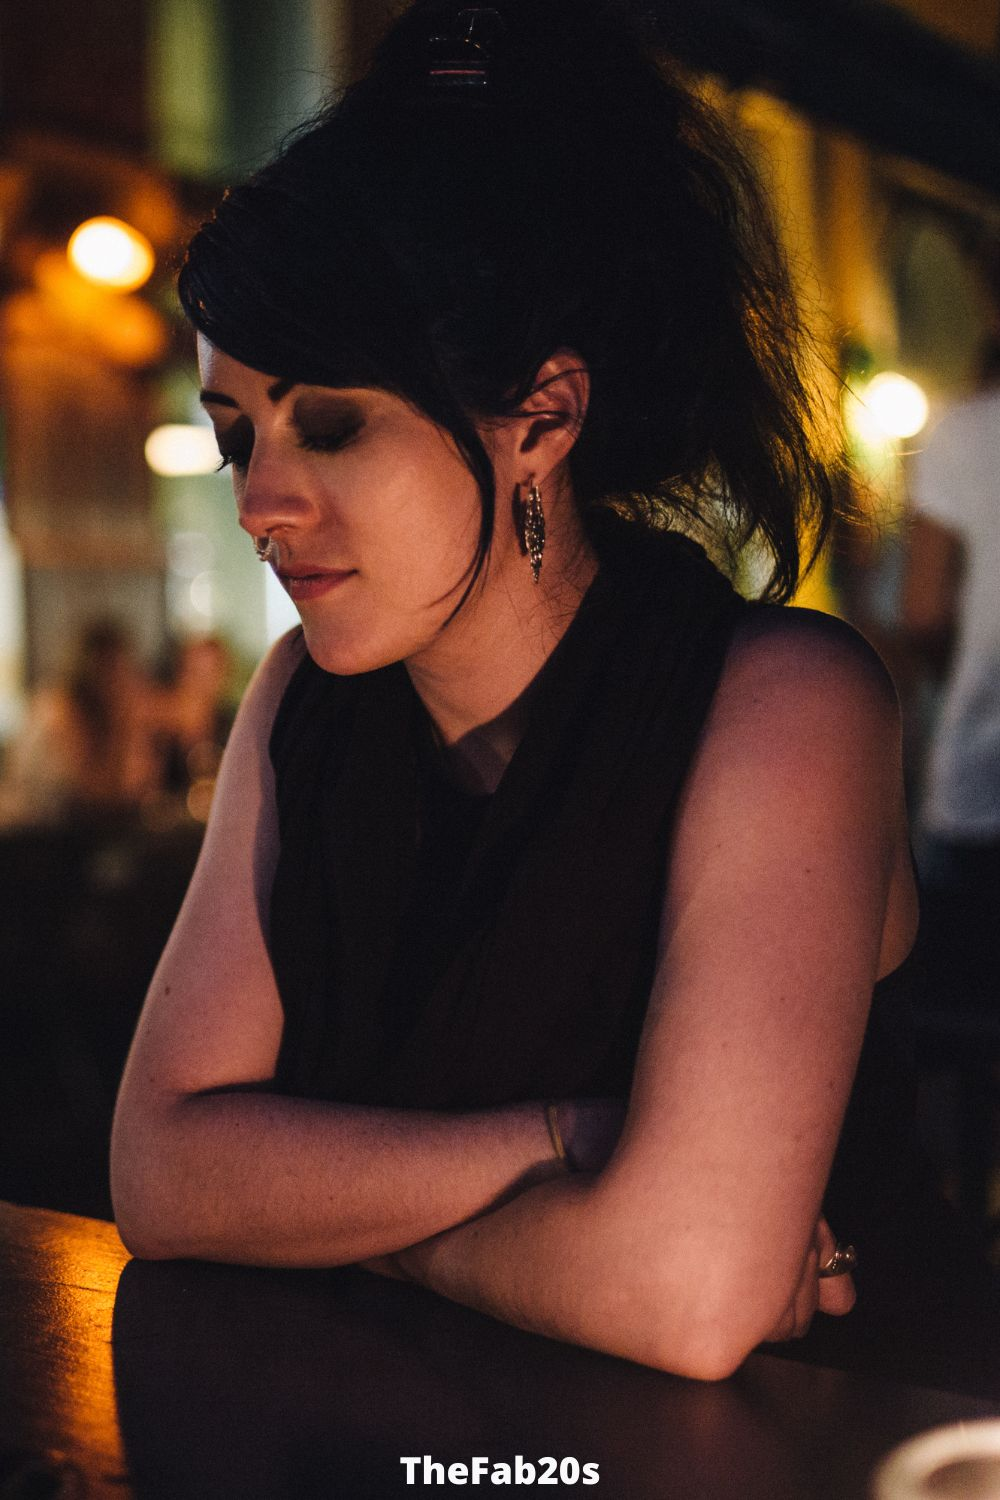 Woman at a bar, deep in thought - featured in Signs He Only Wants You For Your Body